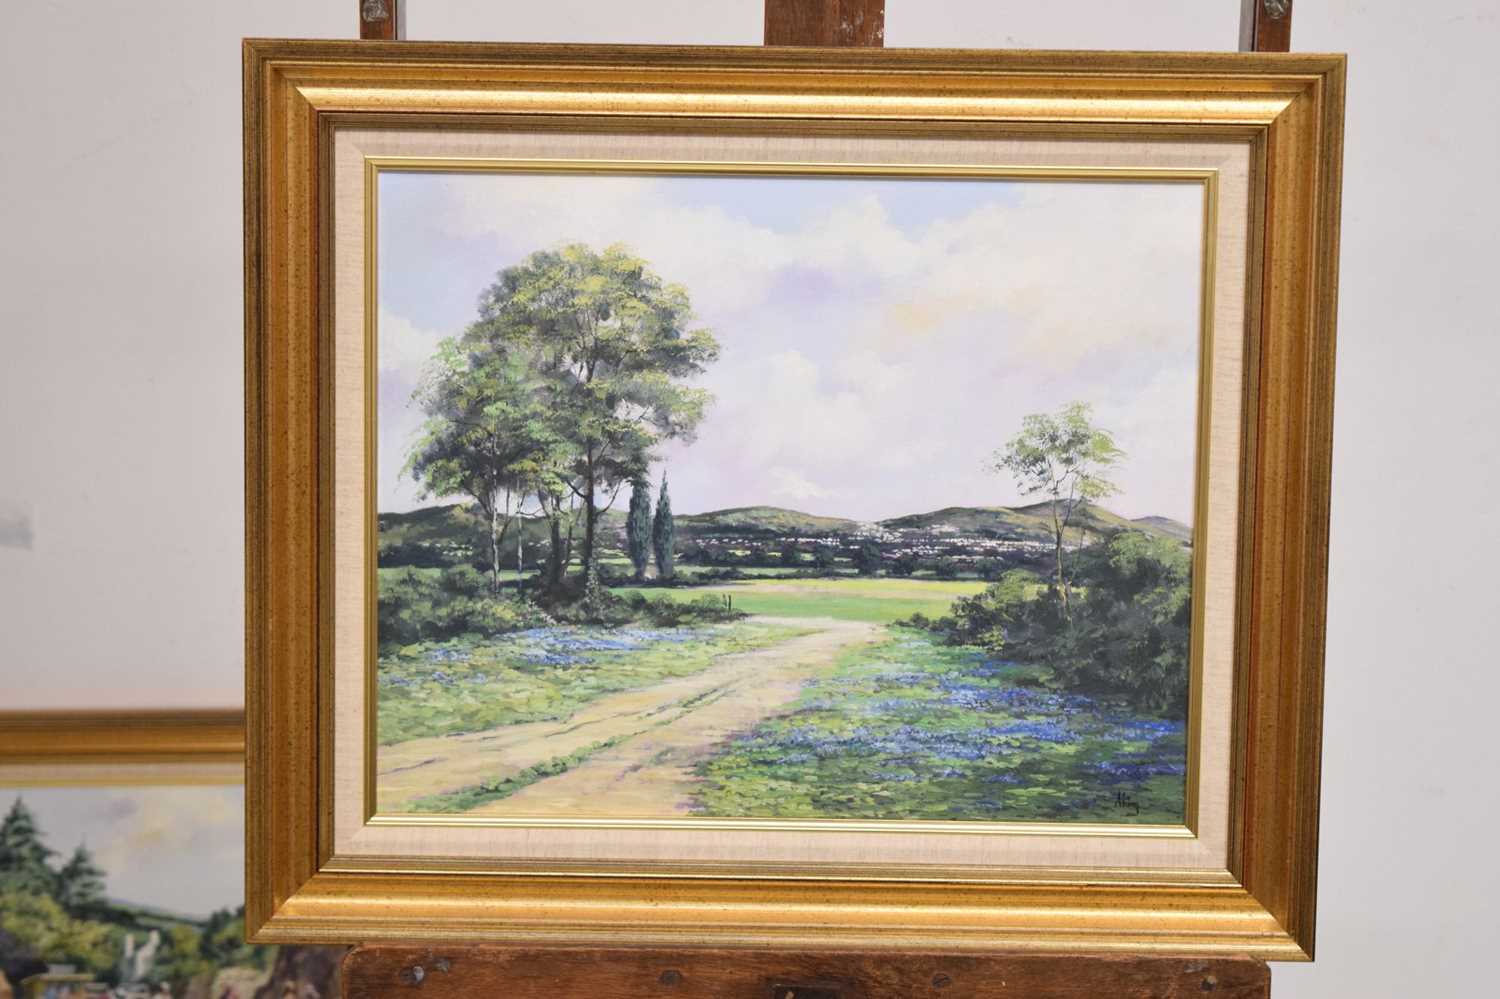 Alan King (1946-2013) - Oil on canvas - 'Memories of the Malverns' - Image 8 of 9